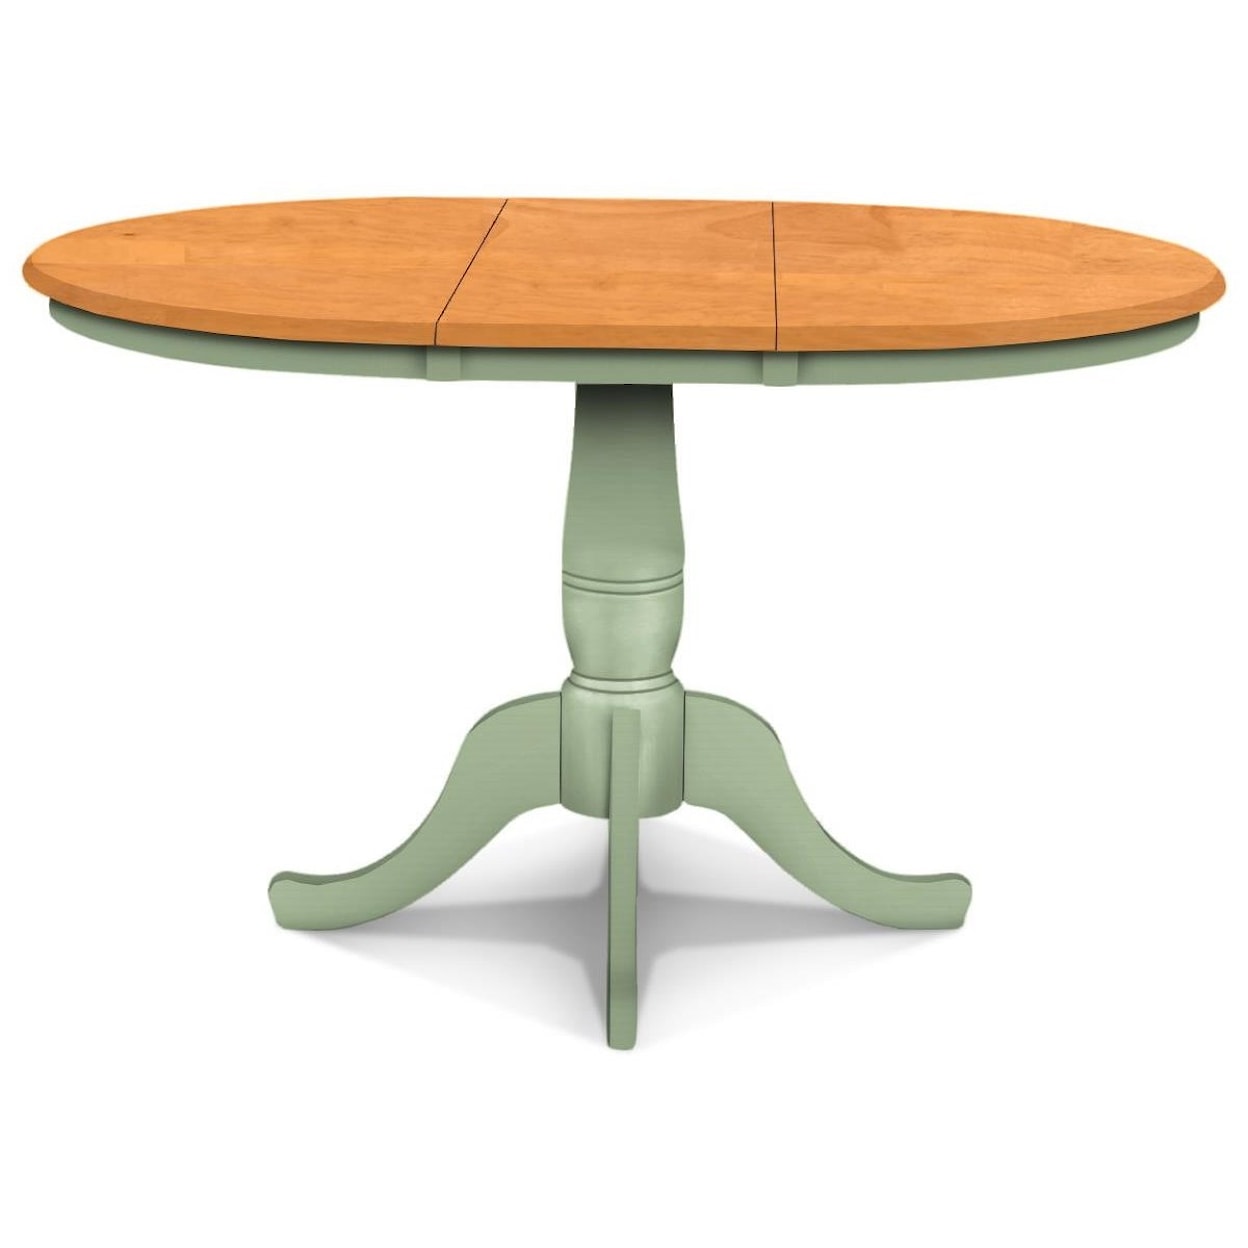 John Thomas SELECT Dining Room Adjustable Height Round Pedestal Table